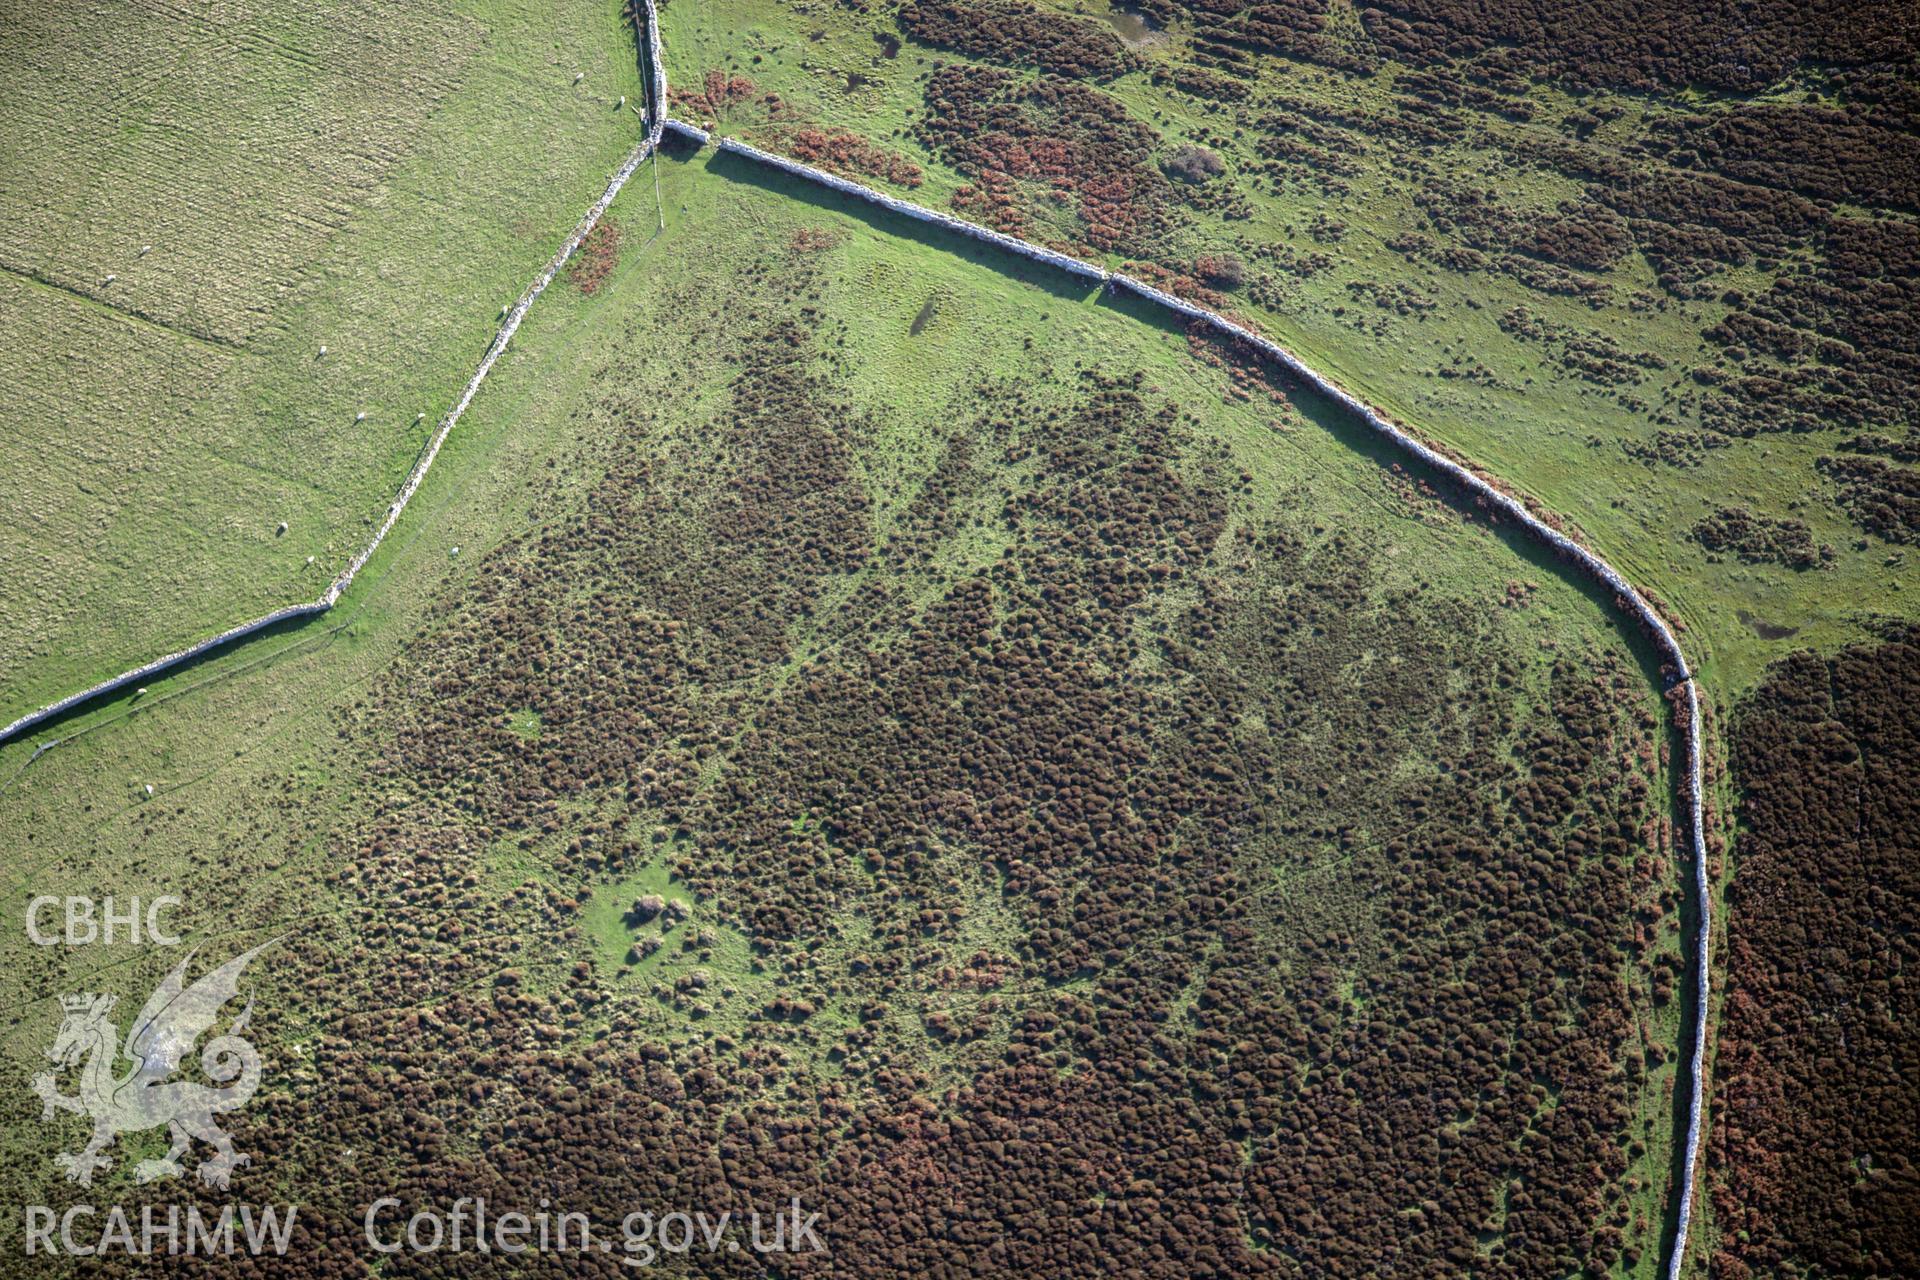 RCAHMW colour oblique photograph of field walls, Ramsey Island. Taken by O. Davies & T. Driver on 22/11/2013.